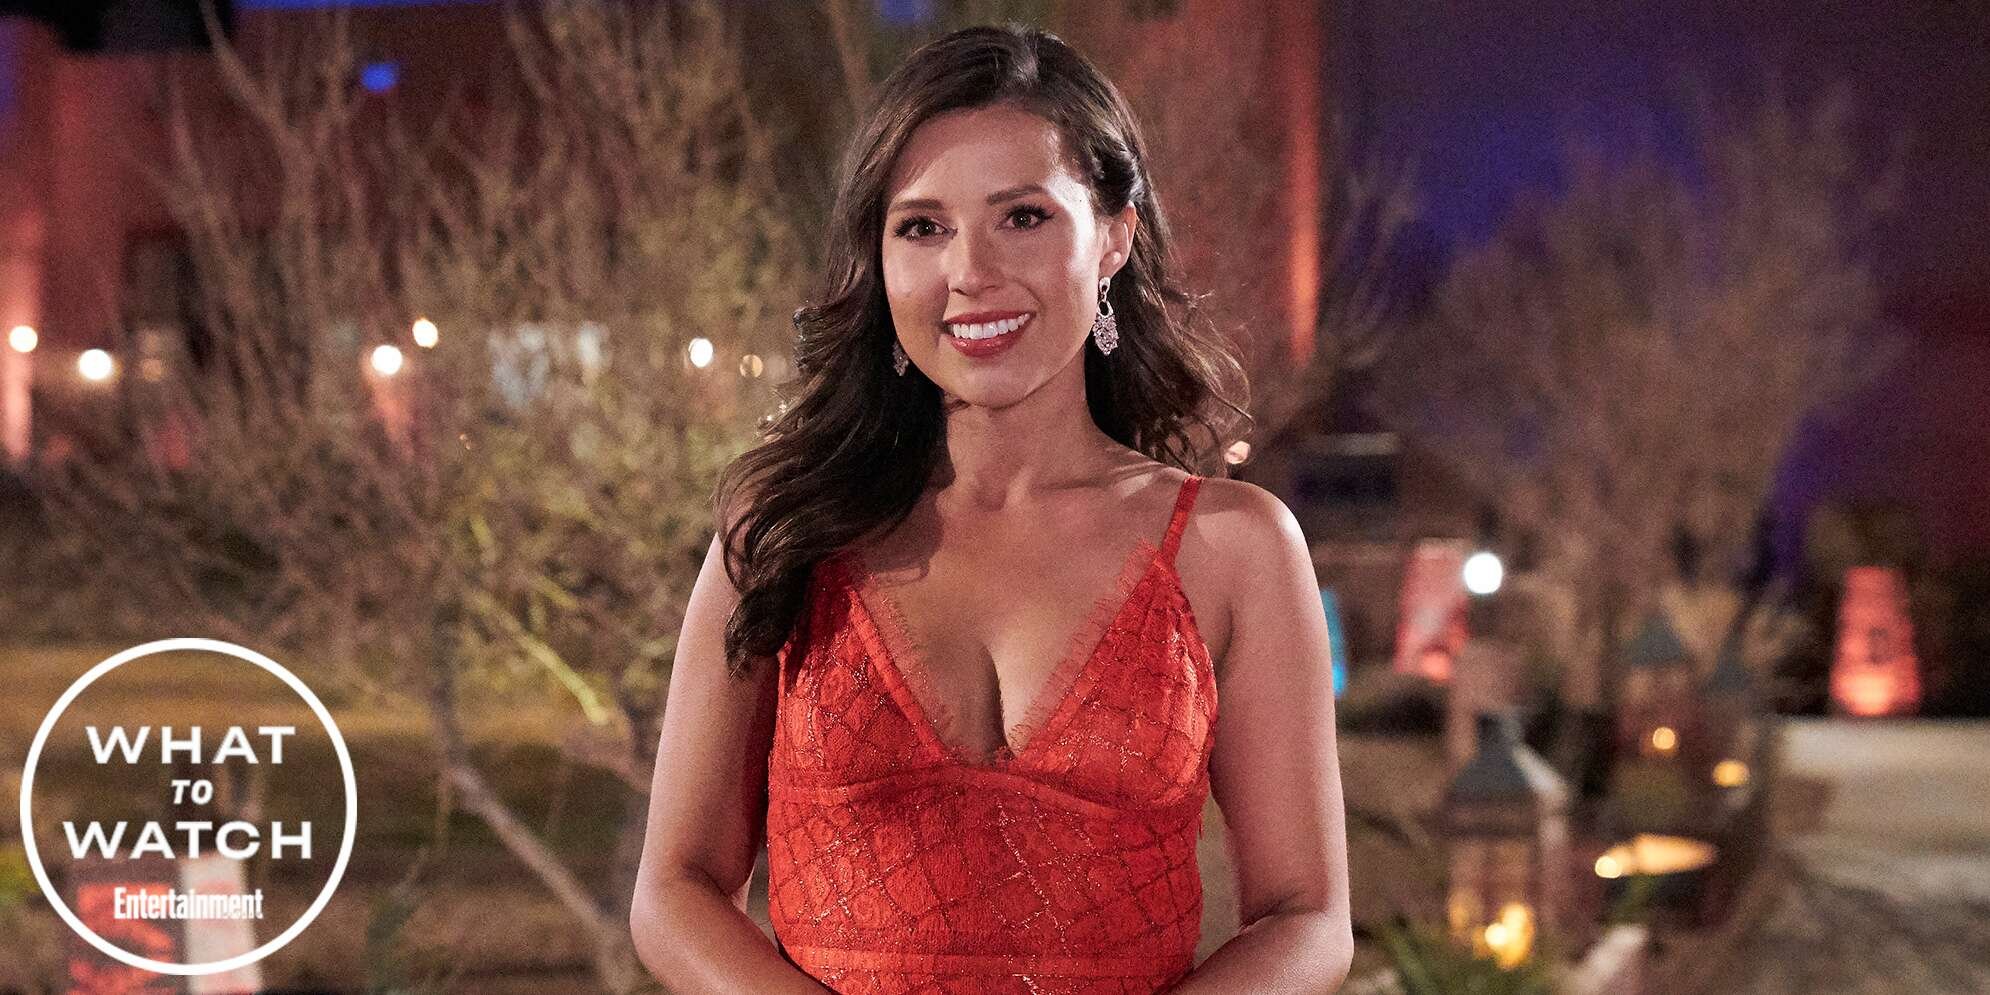 What to Watch on Monday: Katie Thurston's Bachelorette journey begins